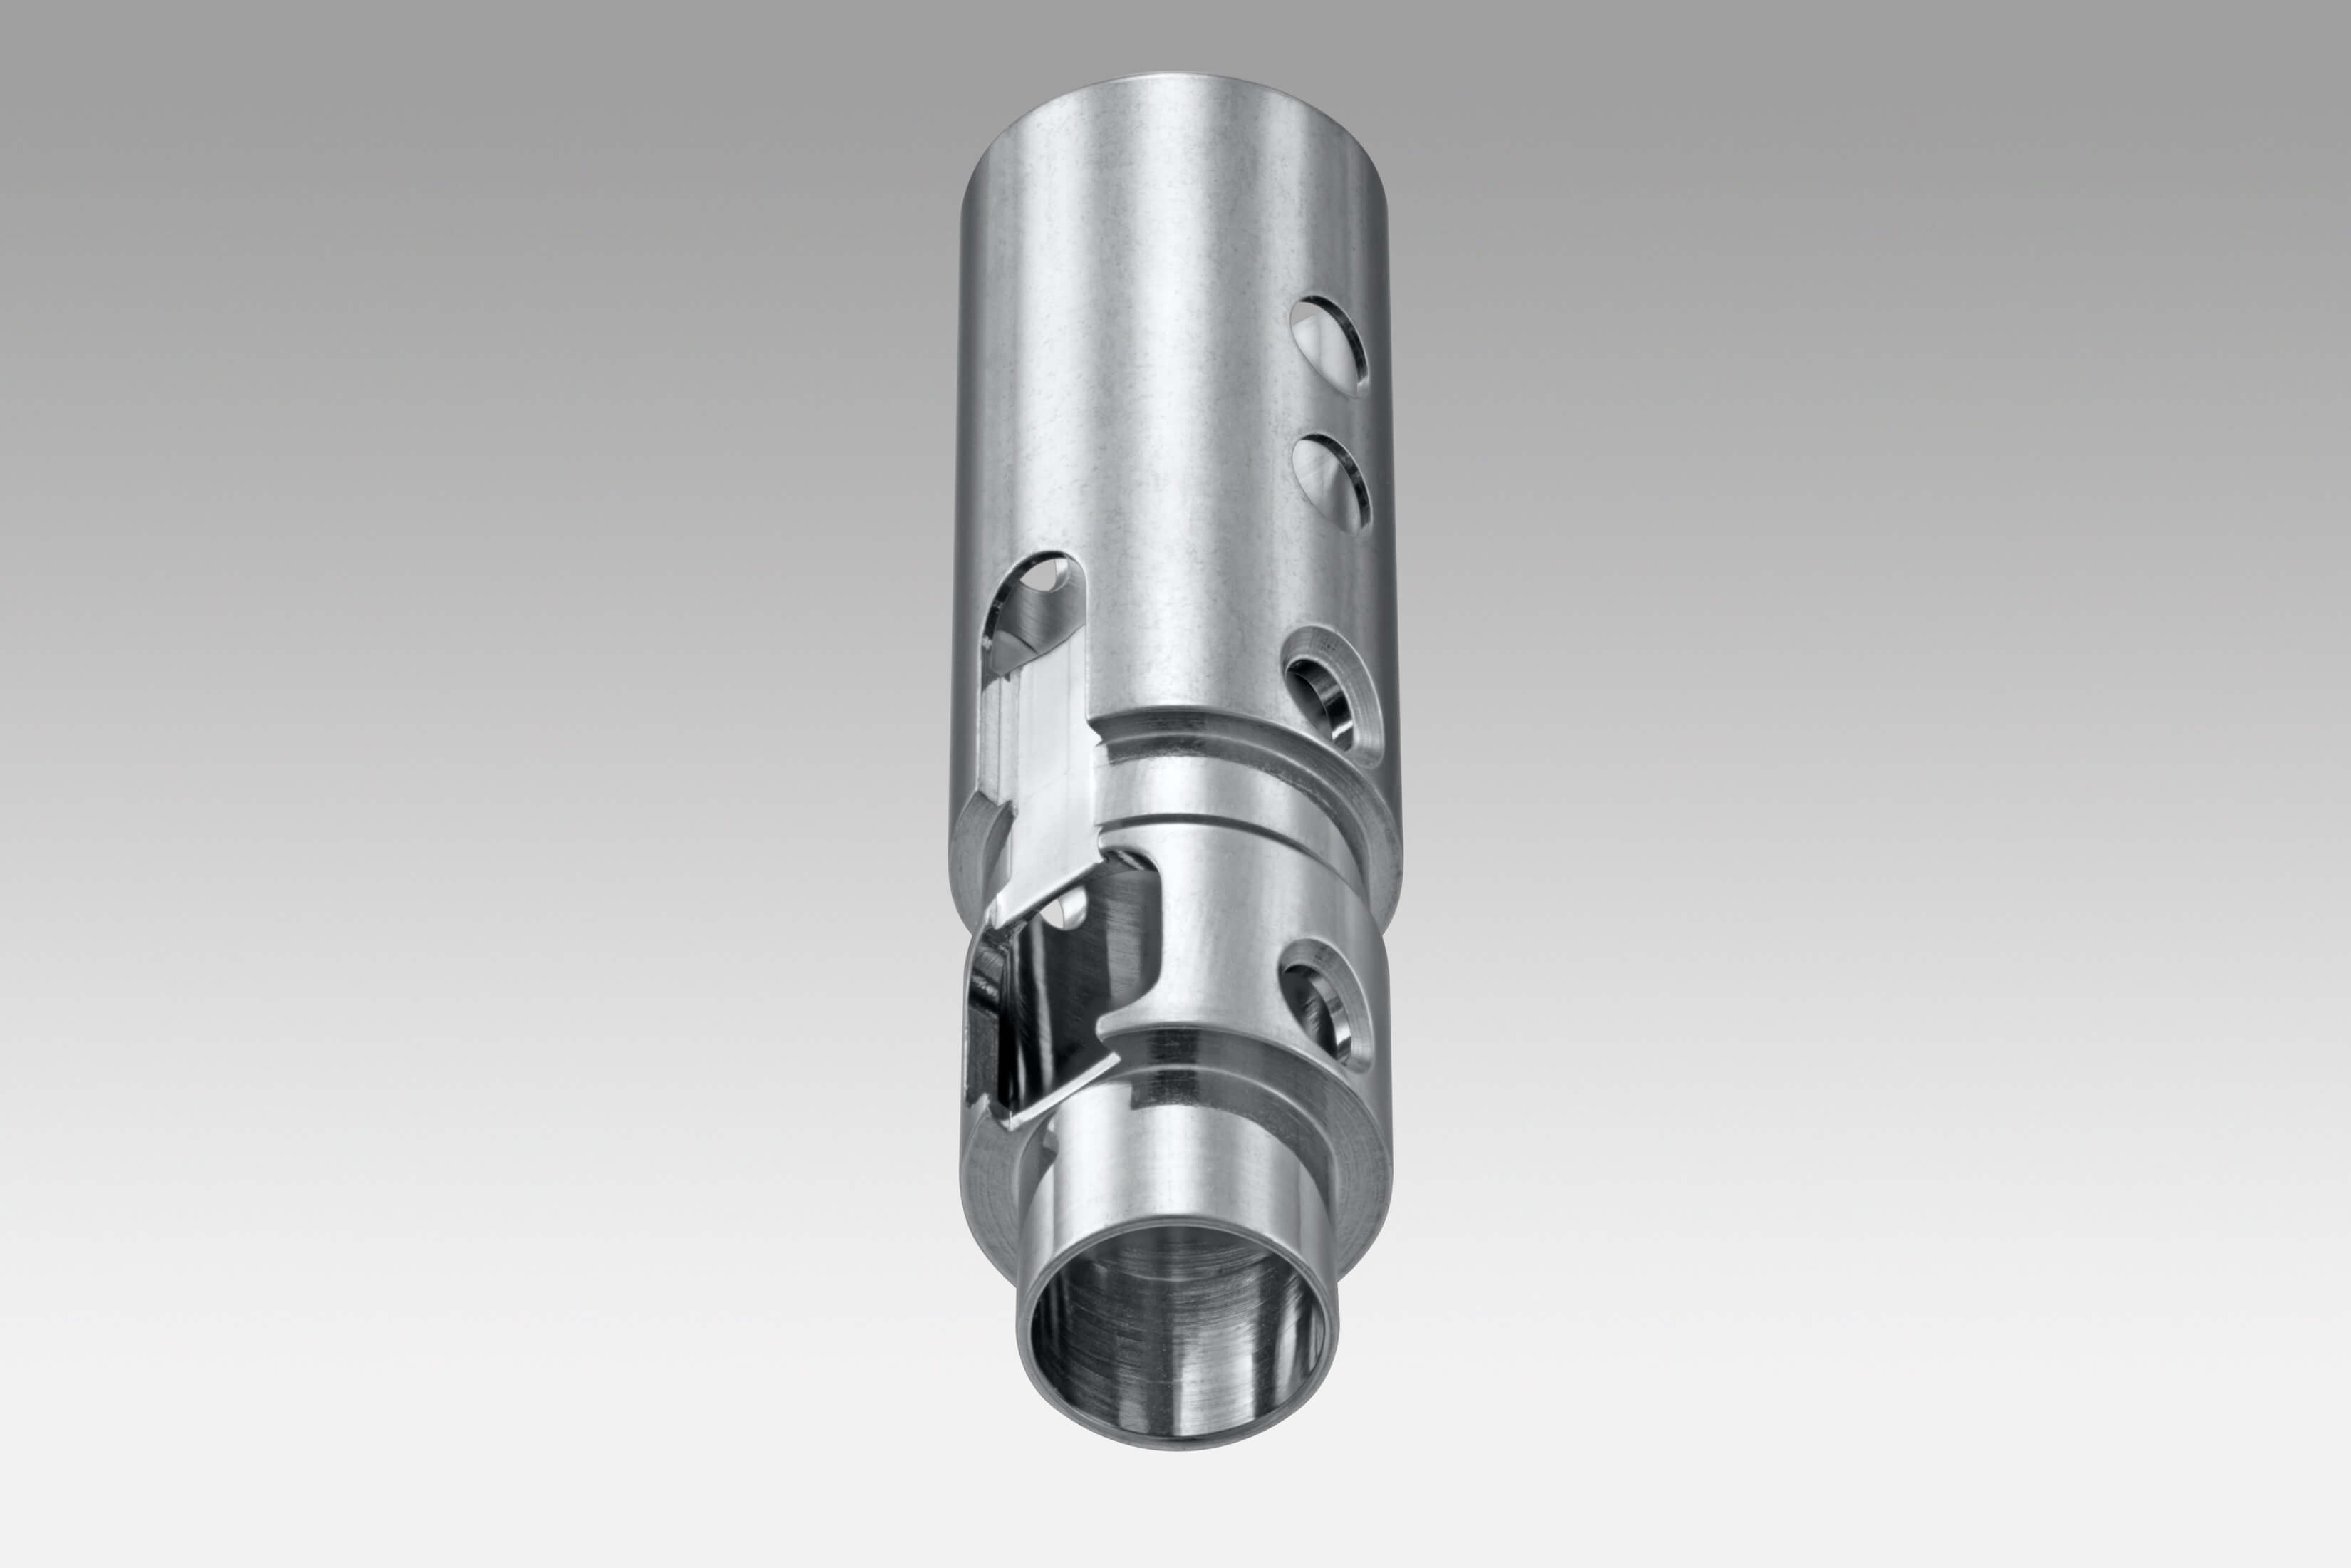 : Guide tube - Swiss supplier and manufacturer for medical micro-turning parts